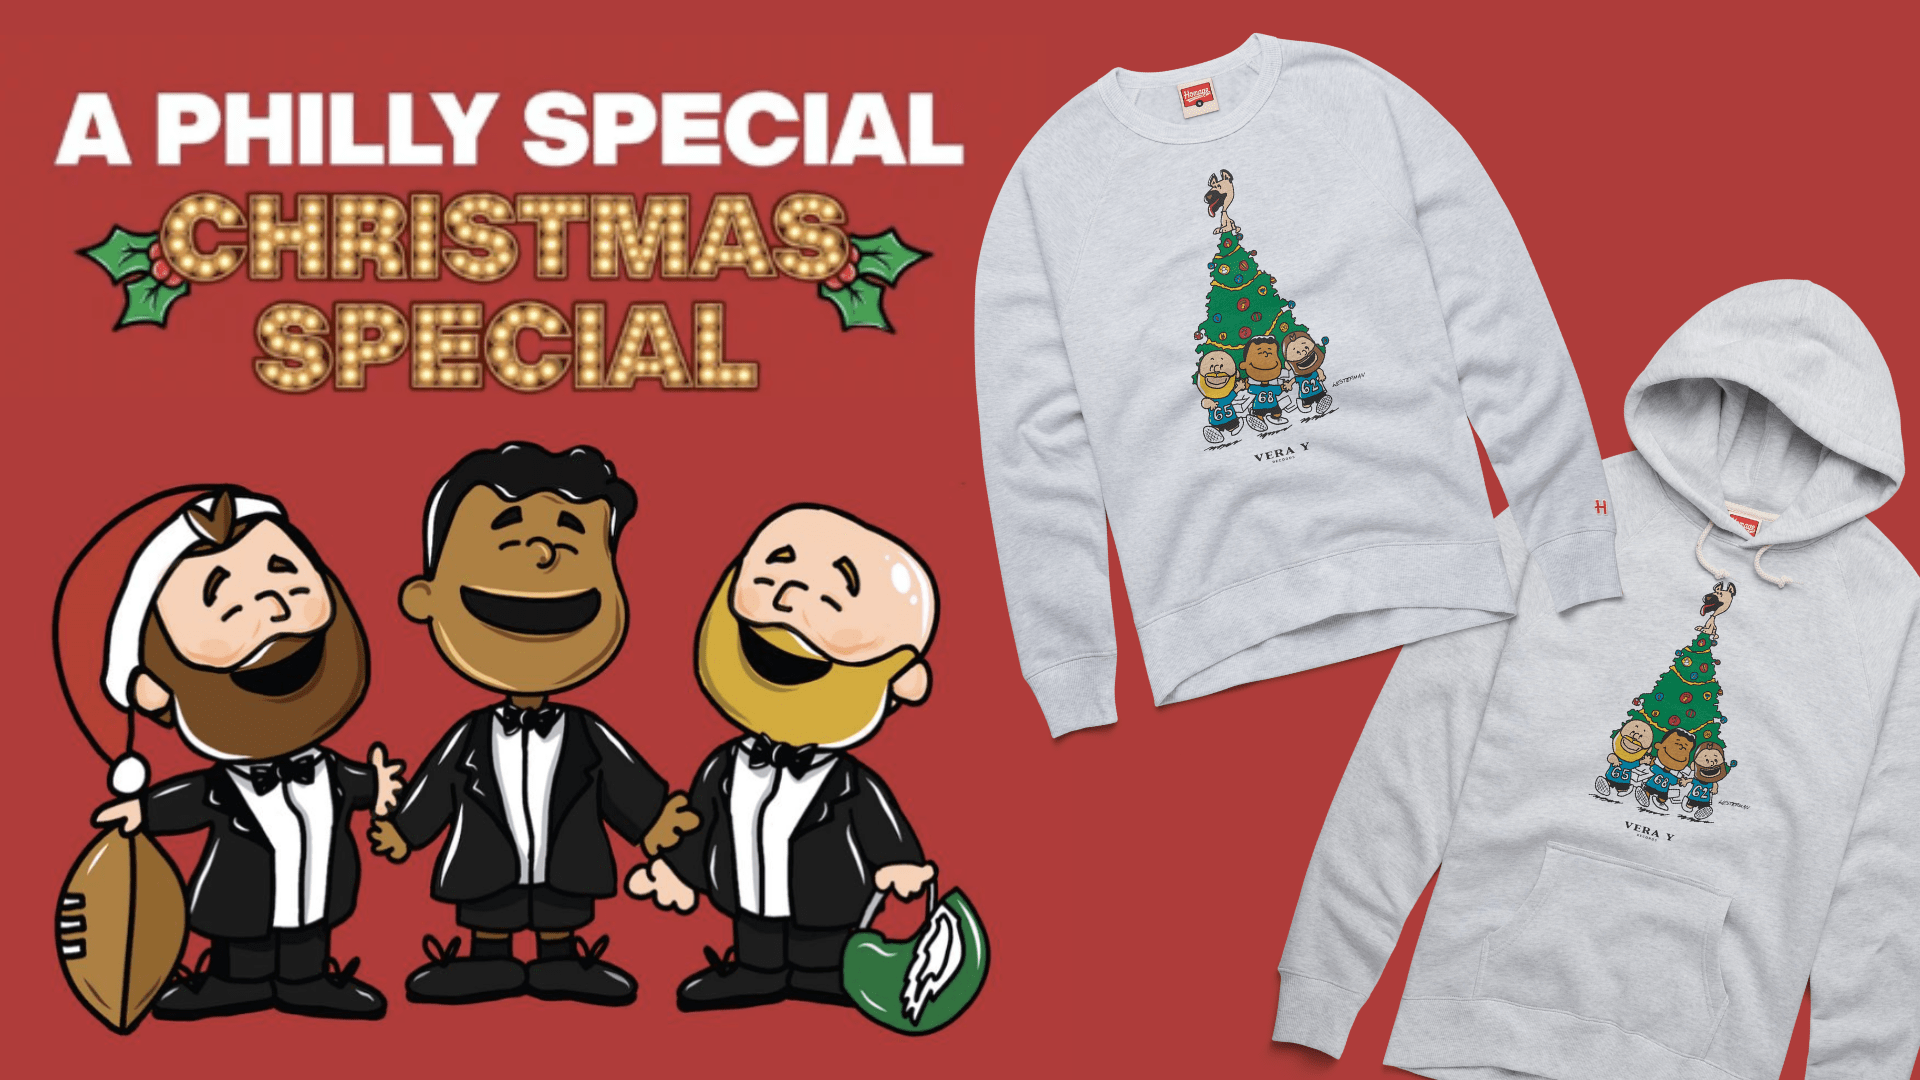 A Philly Special Christmas Special” launches apparel collection